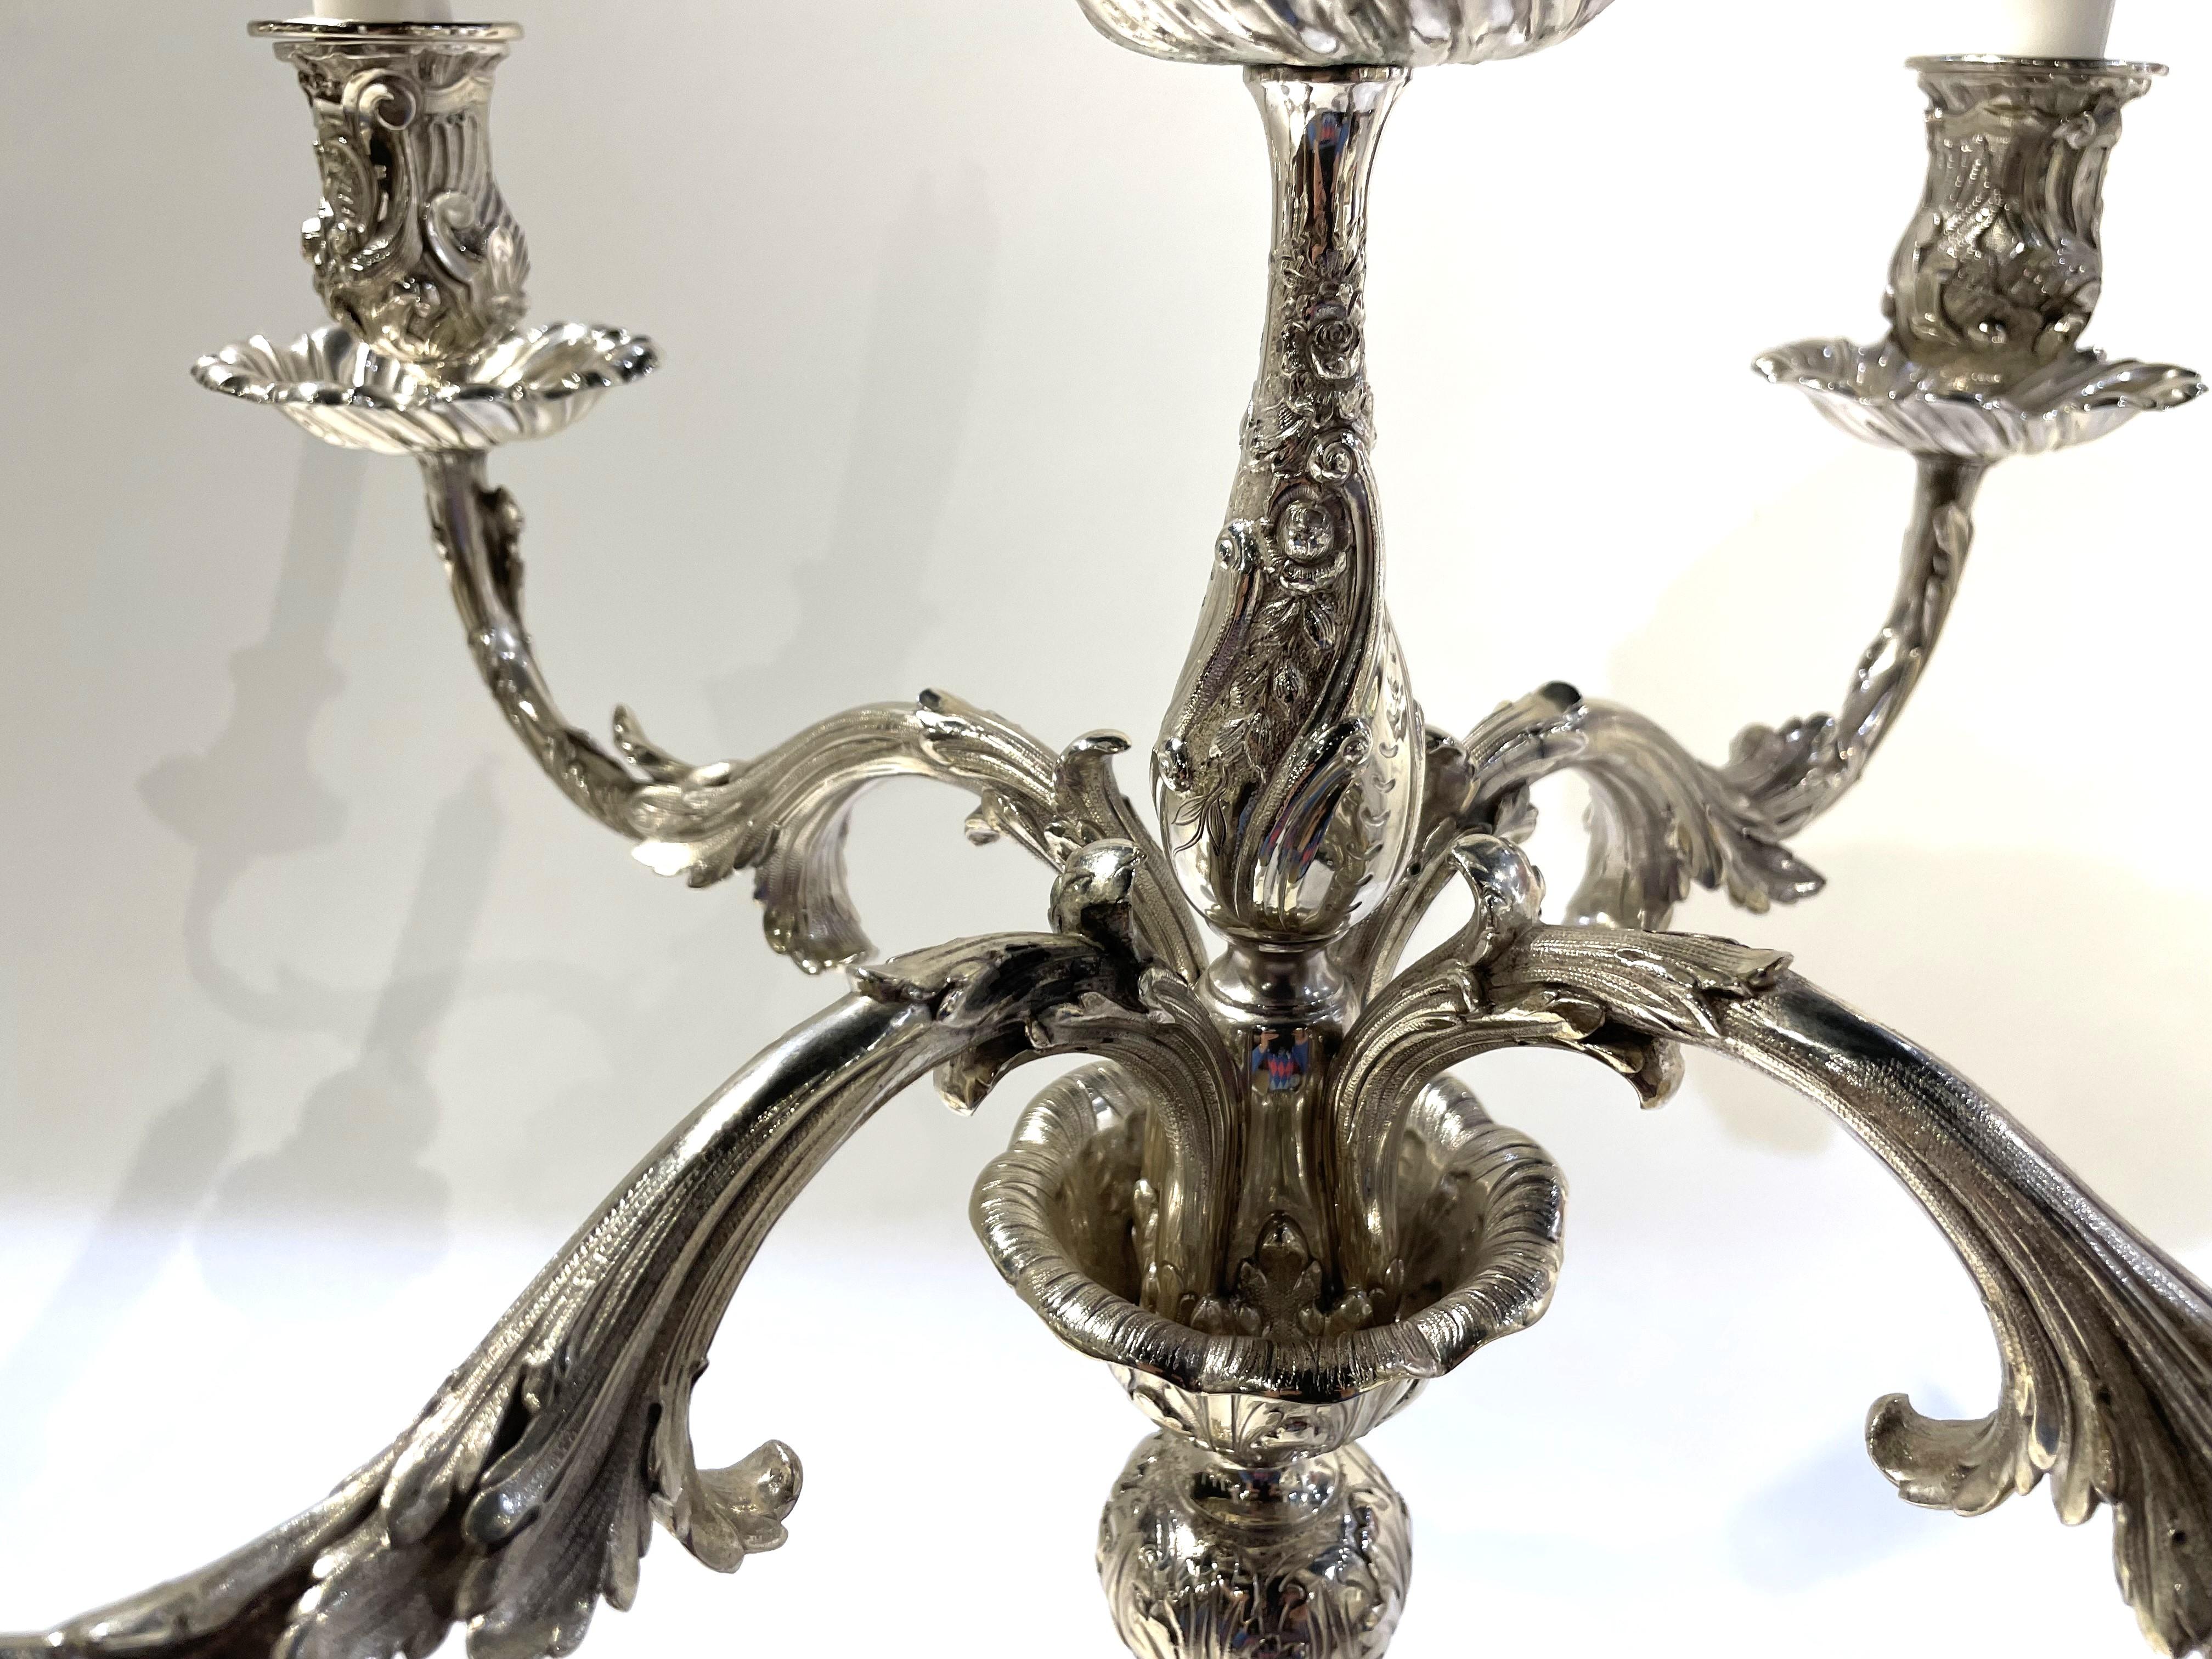 Pair of Tiffany & Co. Sterling Silver 5-Light Monumental Repousse Candelabra In Good Condition For Sale In New York, NY